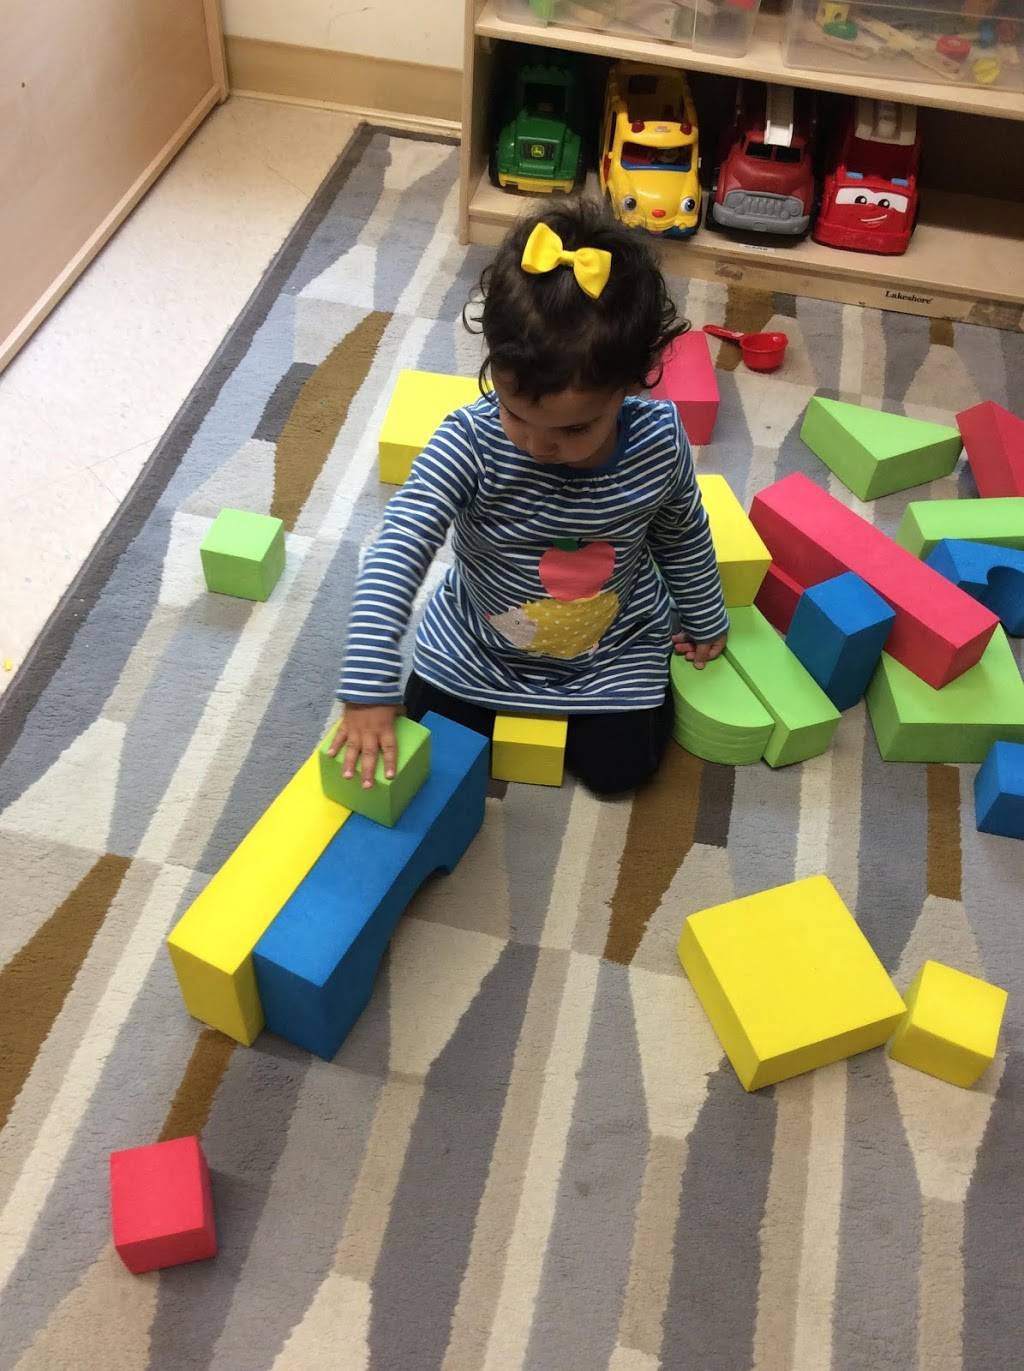 Persimmon Tree Academy for Early Learning | 7727 Persimmon Tree Ln, Bethesda, MD 20817, USA | Phone: (301) 438-8550